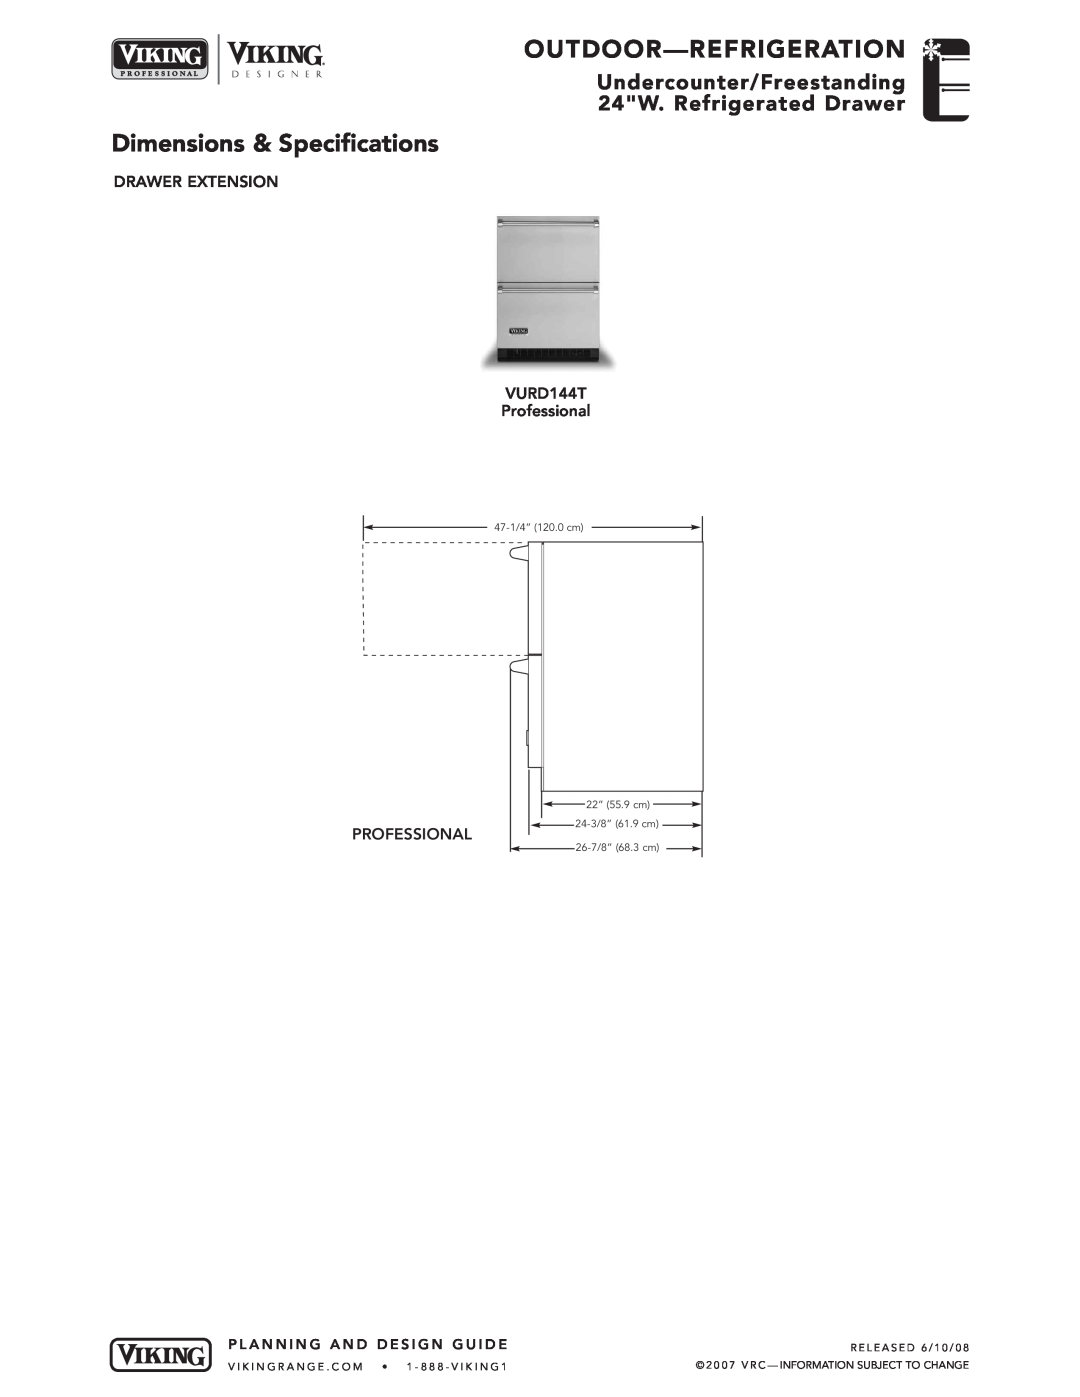 Viking DRAWER EXTENSION VURD144T Professional, Outdoor-Refriger Ation, Dimensions & Specifications, Planning, Design 